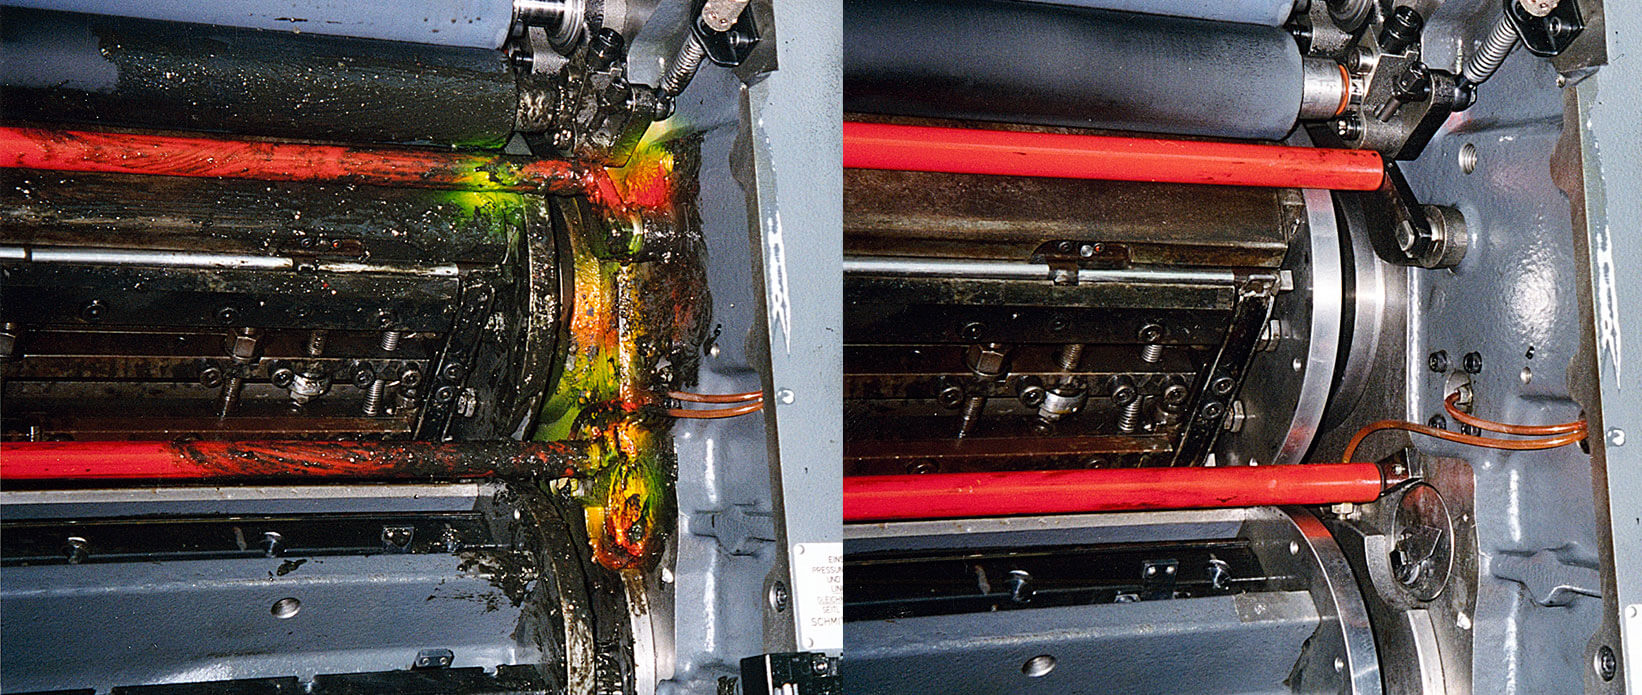 Offset Printing Machine Cleaning (Before & After)